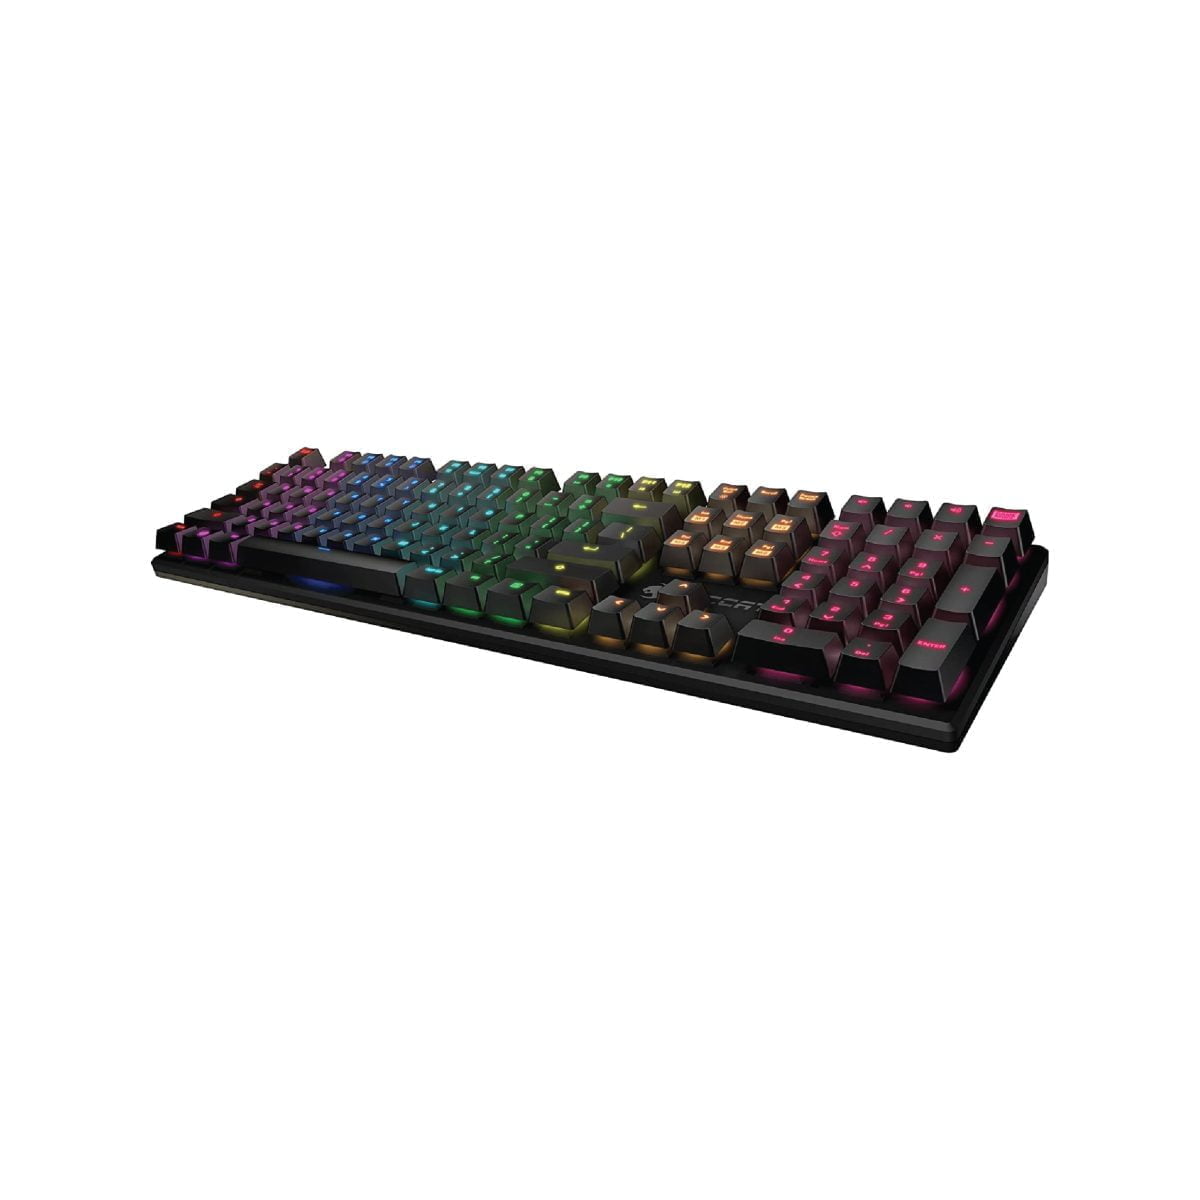 Ramadan2 25 Roccat 16.8M Color Key Back-Lighting With Quick Access To Stunning Effects Plus F1-F4 Key Lighting Fx Presets Quick Toggle: Wave, Breathing, Ripple, Solid Roccat Roccat Suora Fx - Rgb Illuminated Frameless Mechanical Gaming Keyboard